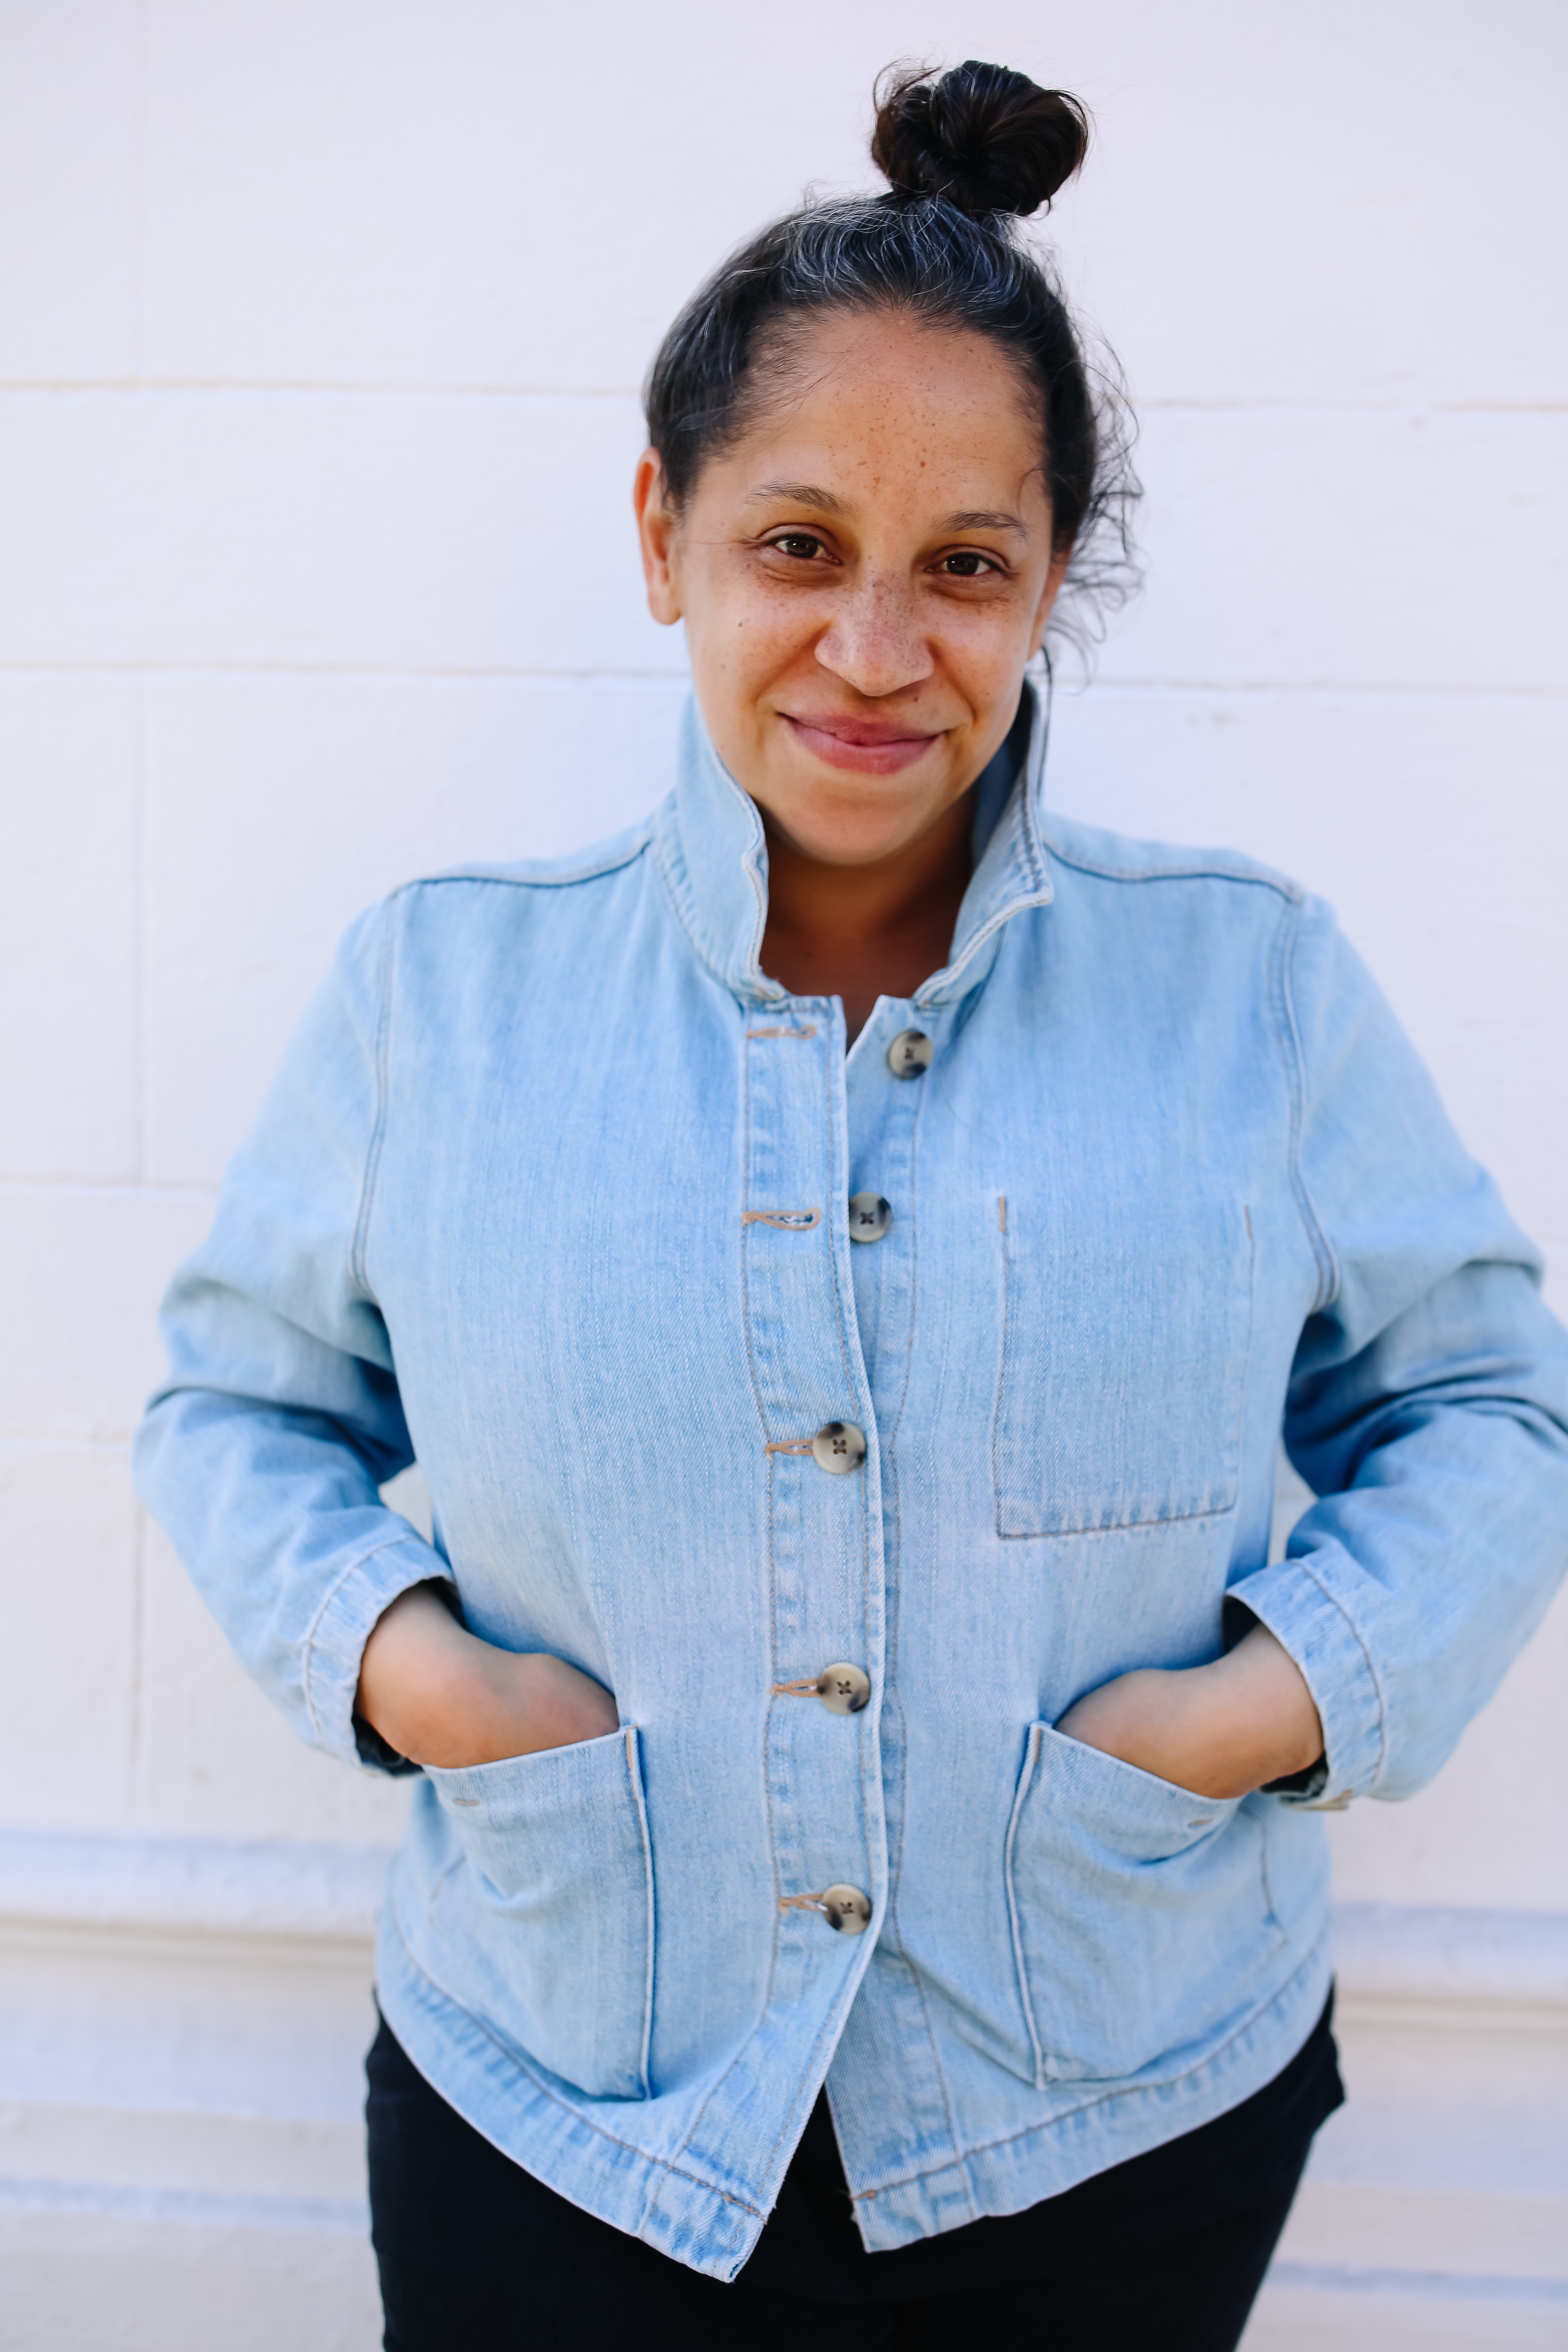 Photo of Luisa Alberto, a woman with her hair in a bun on top of her head and wearing a light blue denim jacked with her hands in the front jacket pockets